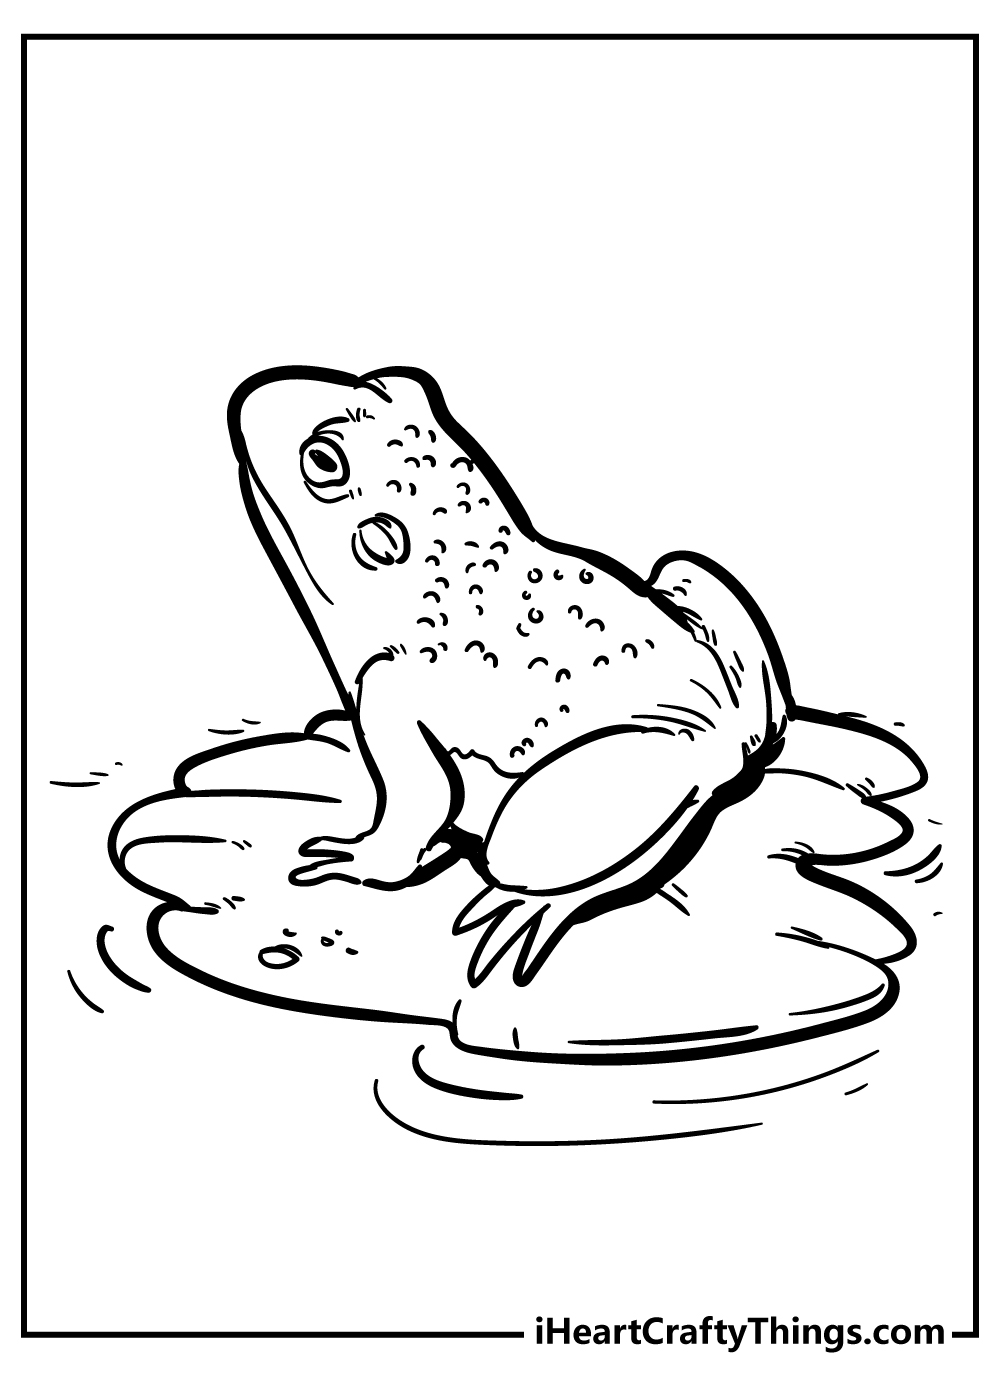 Toad Coloring Pages free pdf download